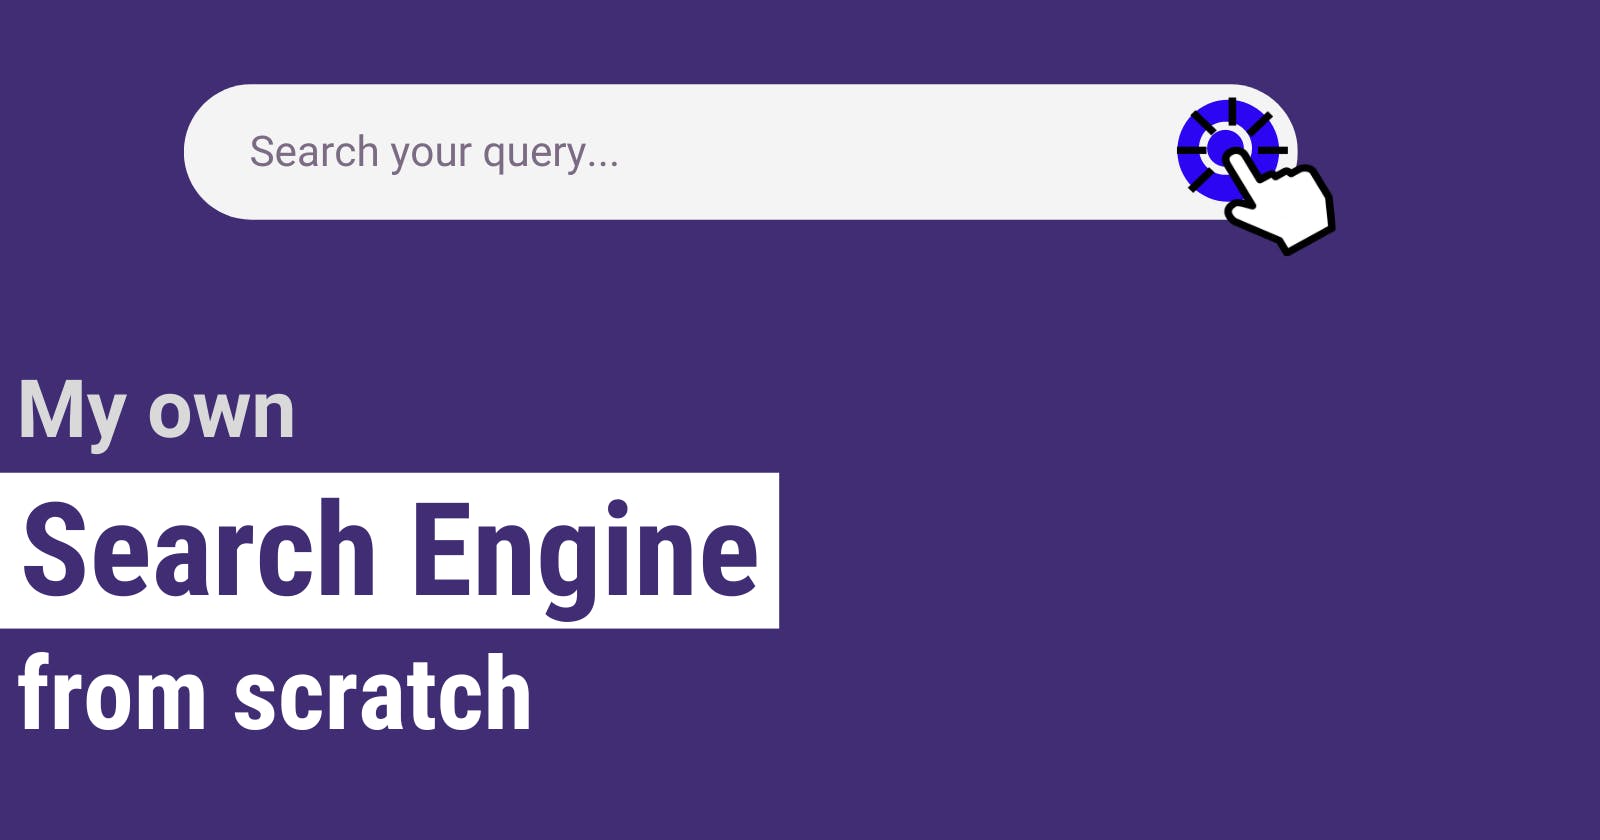 I created my own search engine from scratch